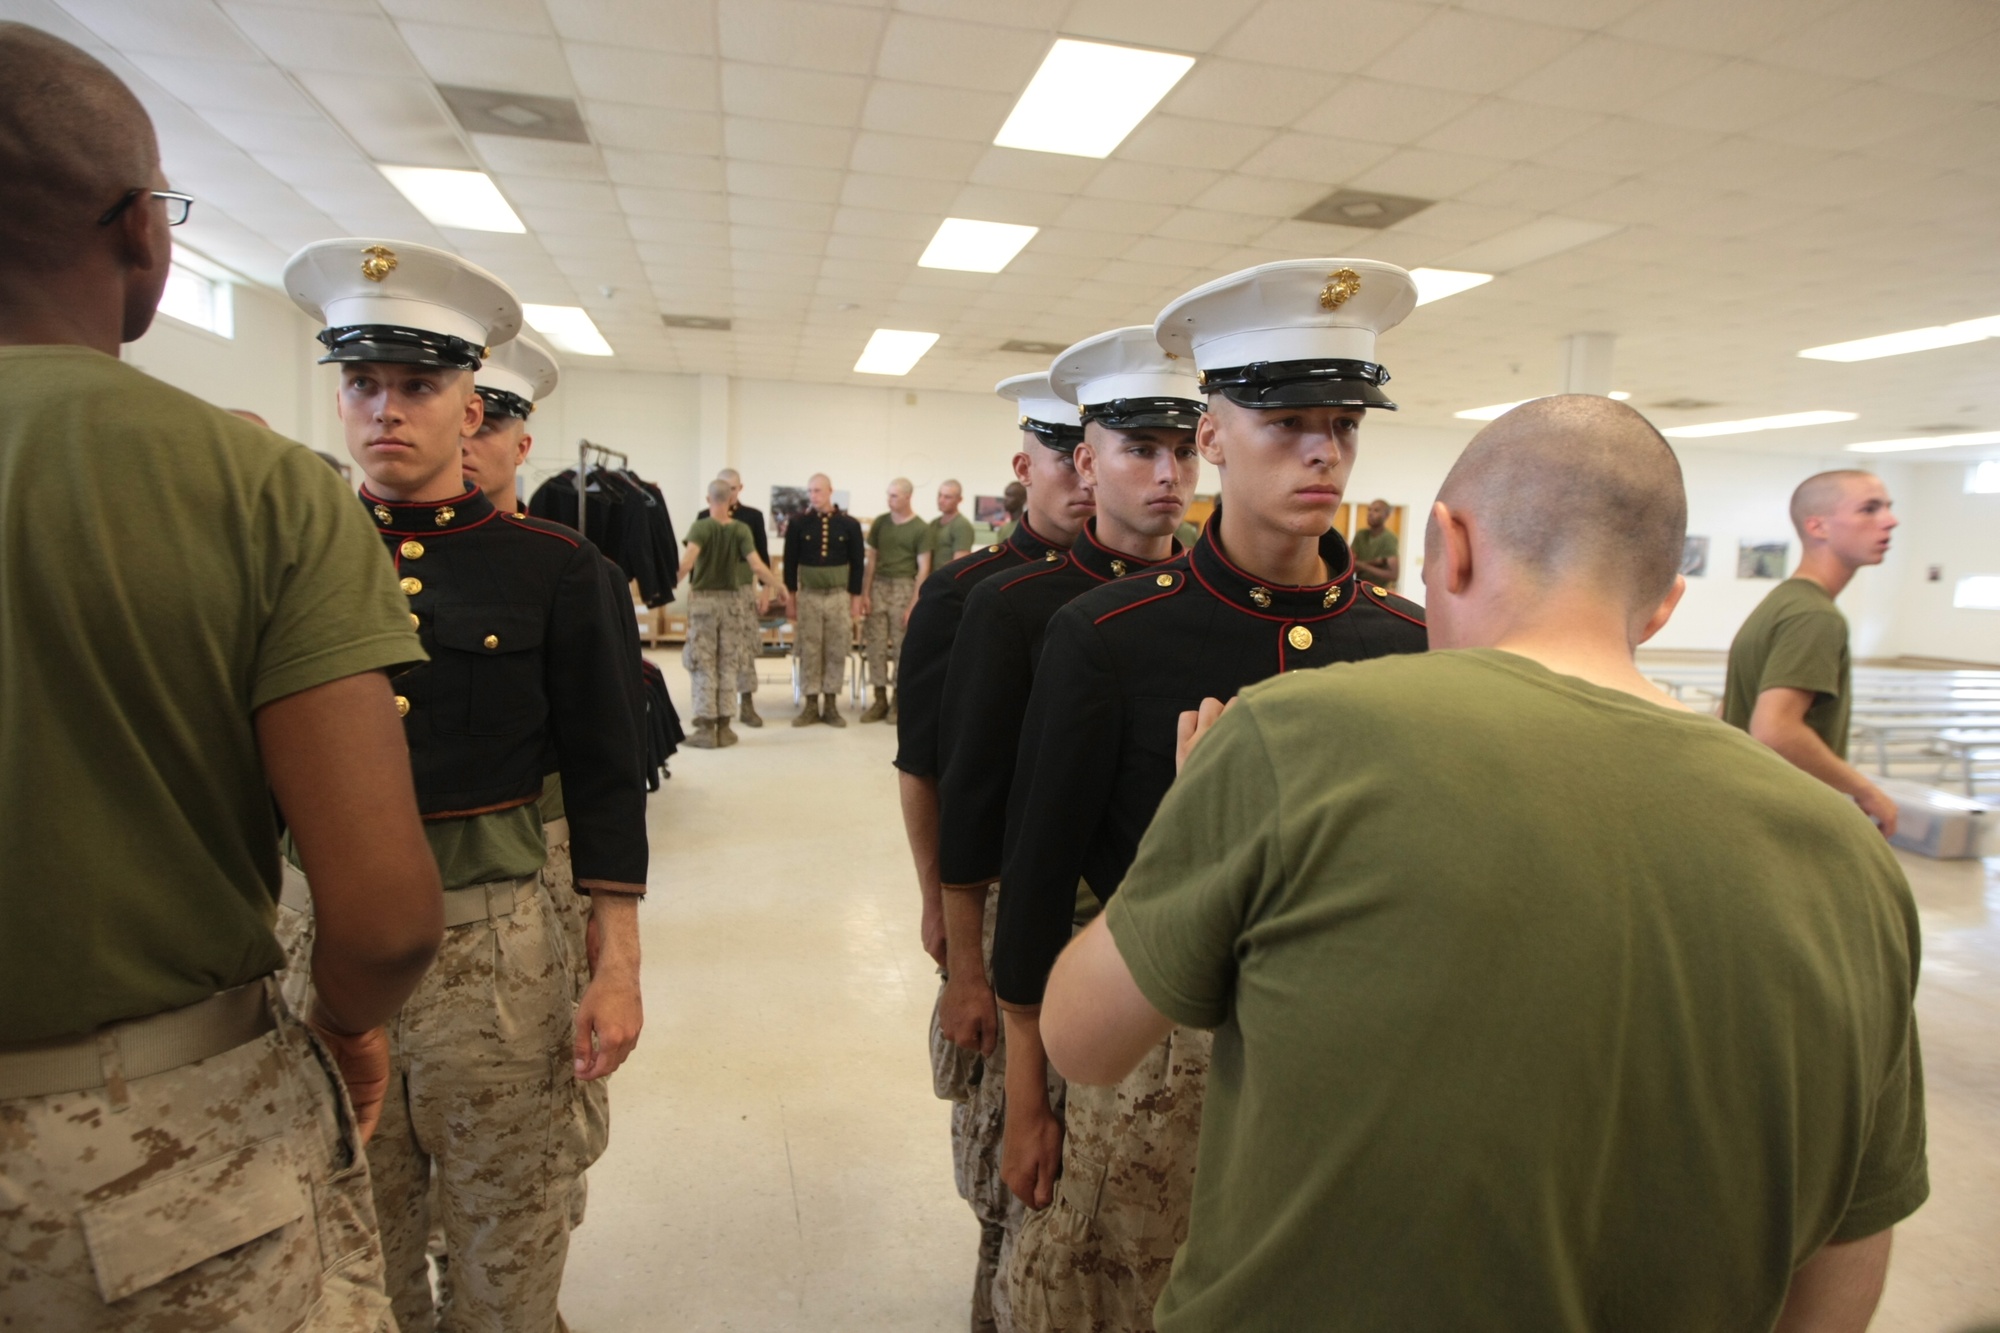 DVIDS - Images - Photo Gallery: Marine recruits dress in iconic blues for  Parris Island boot camp [Image 10 of 13]